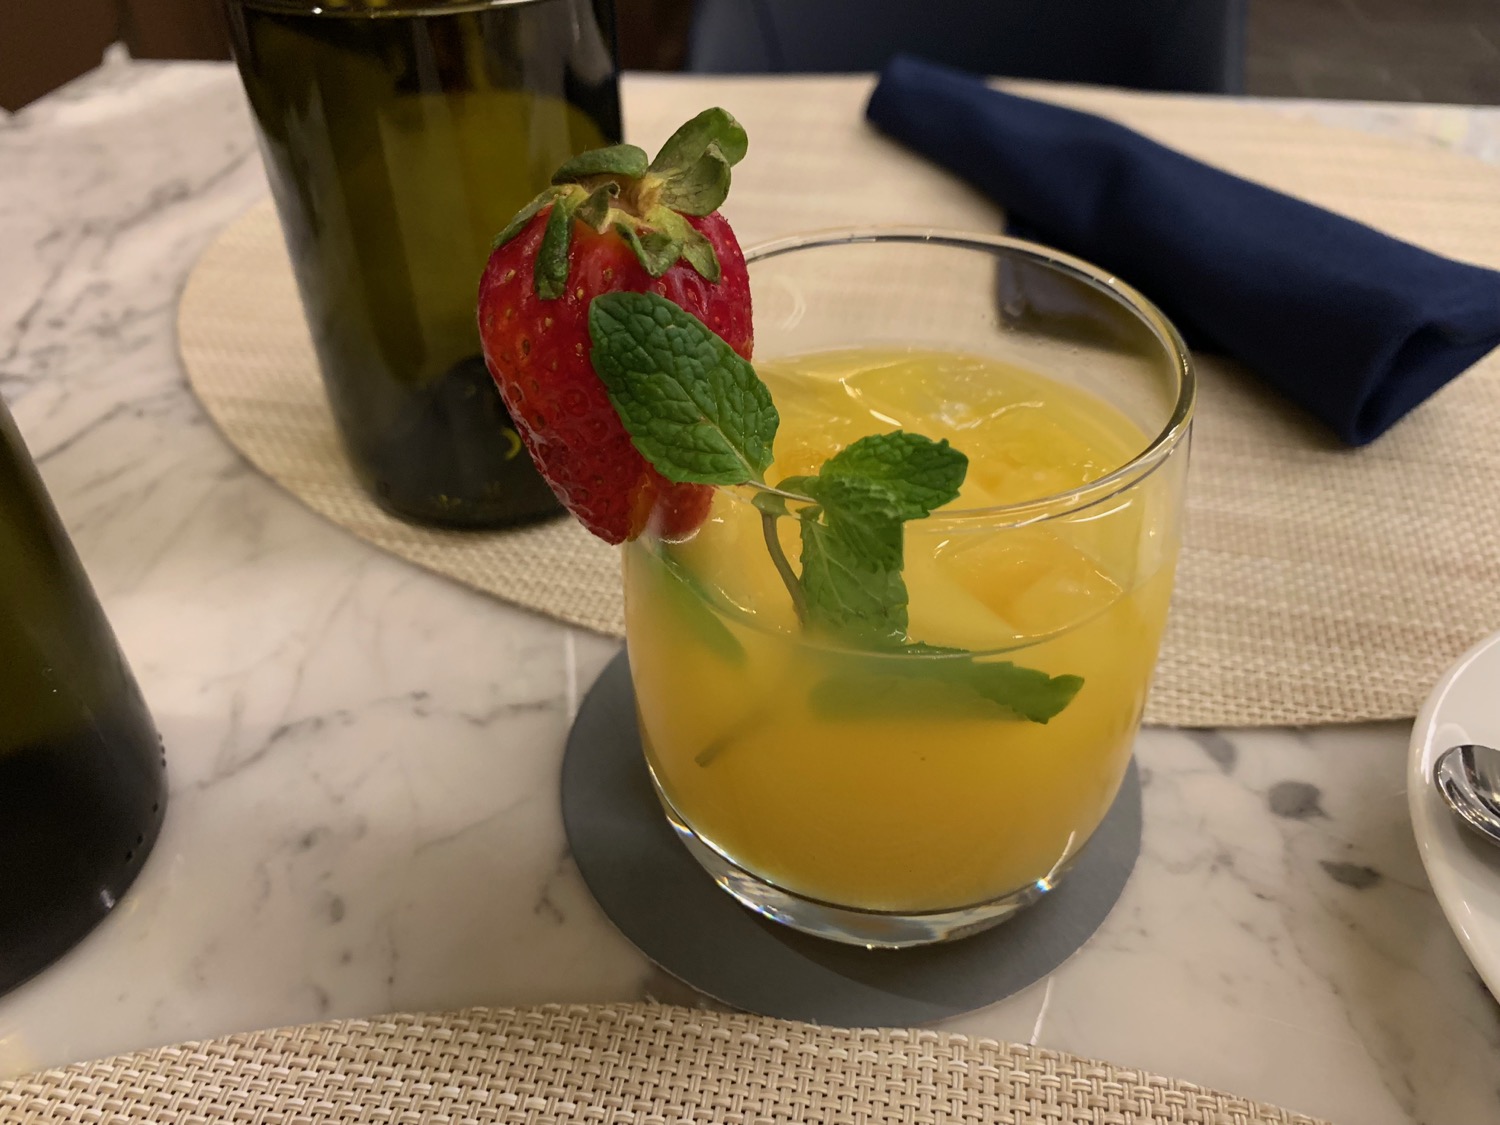 a glass of yellow liquid with a strawberry on top